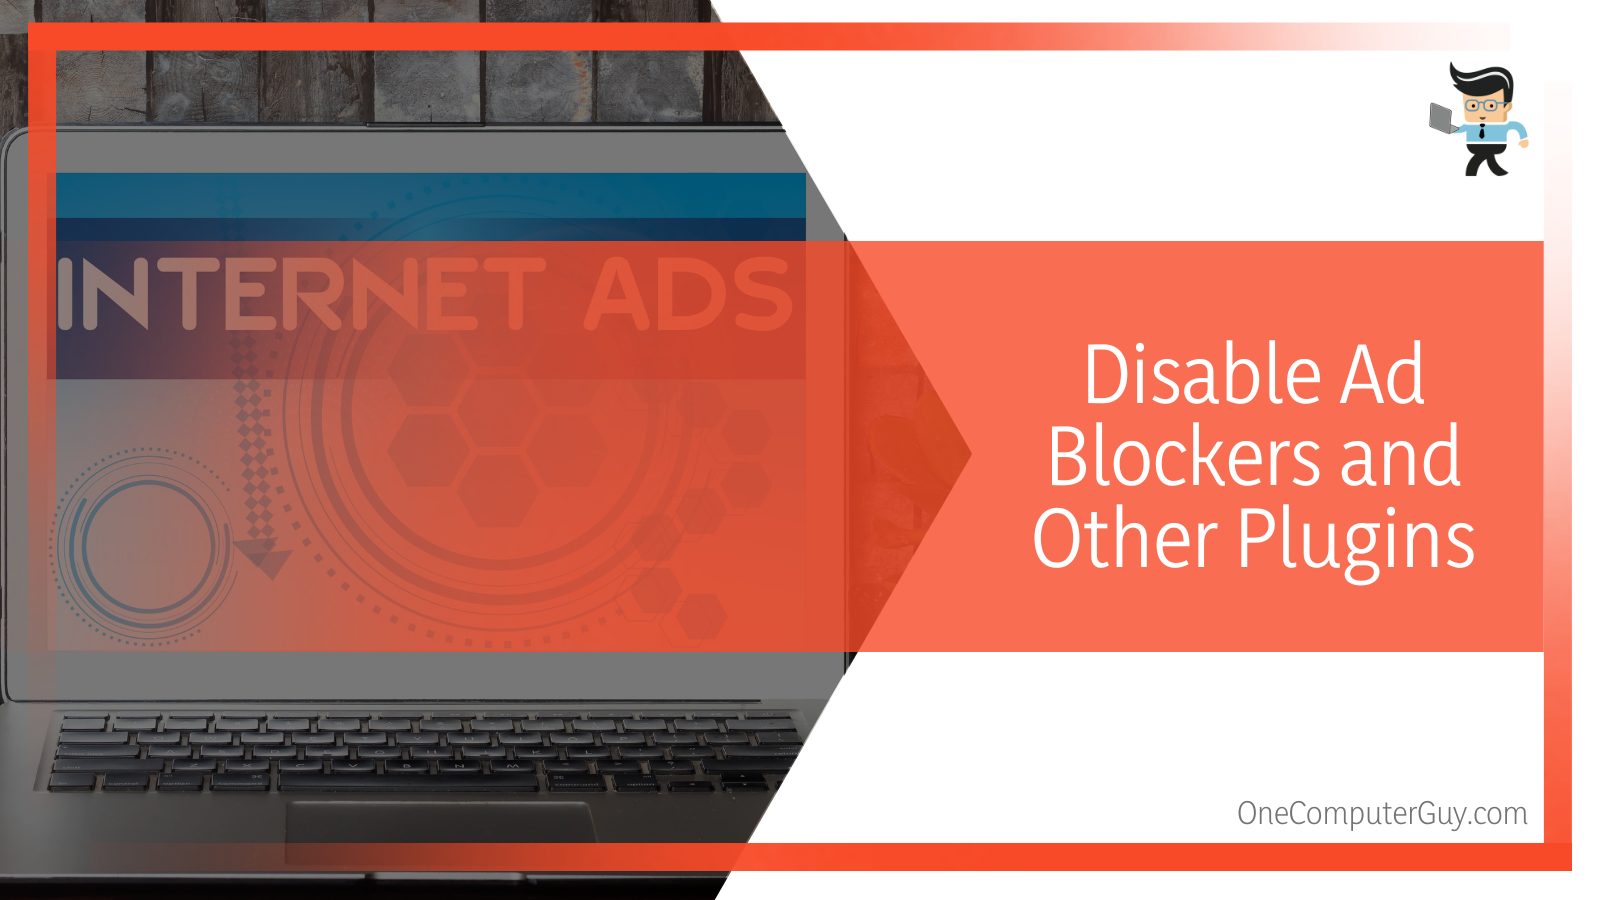 Disable Ad Blockers and Other Plugins